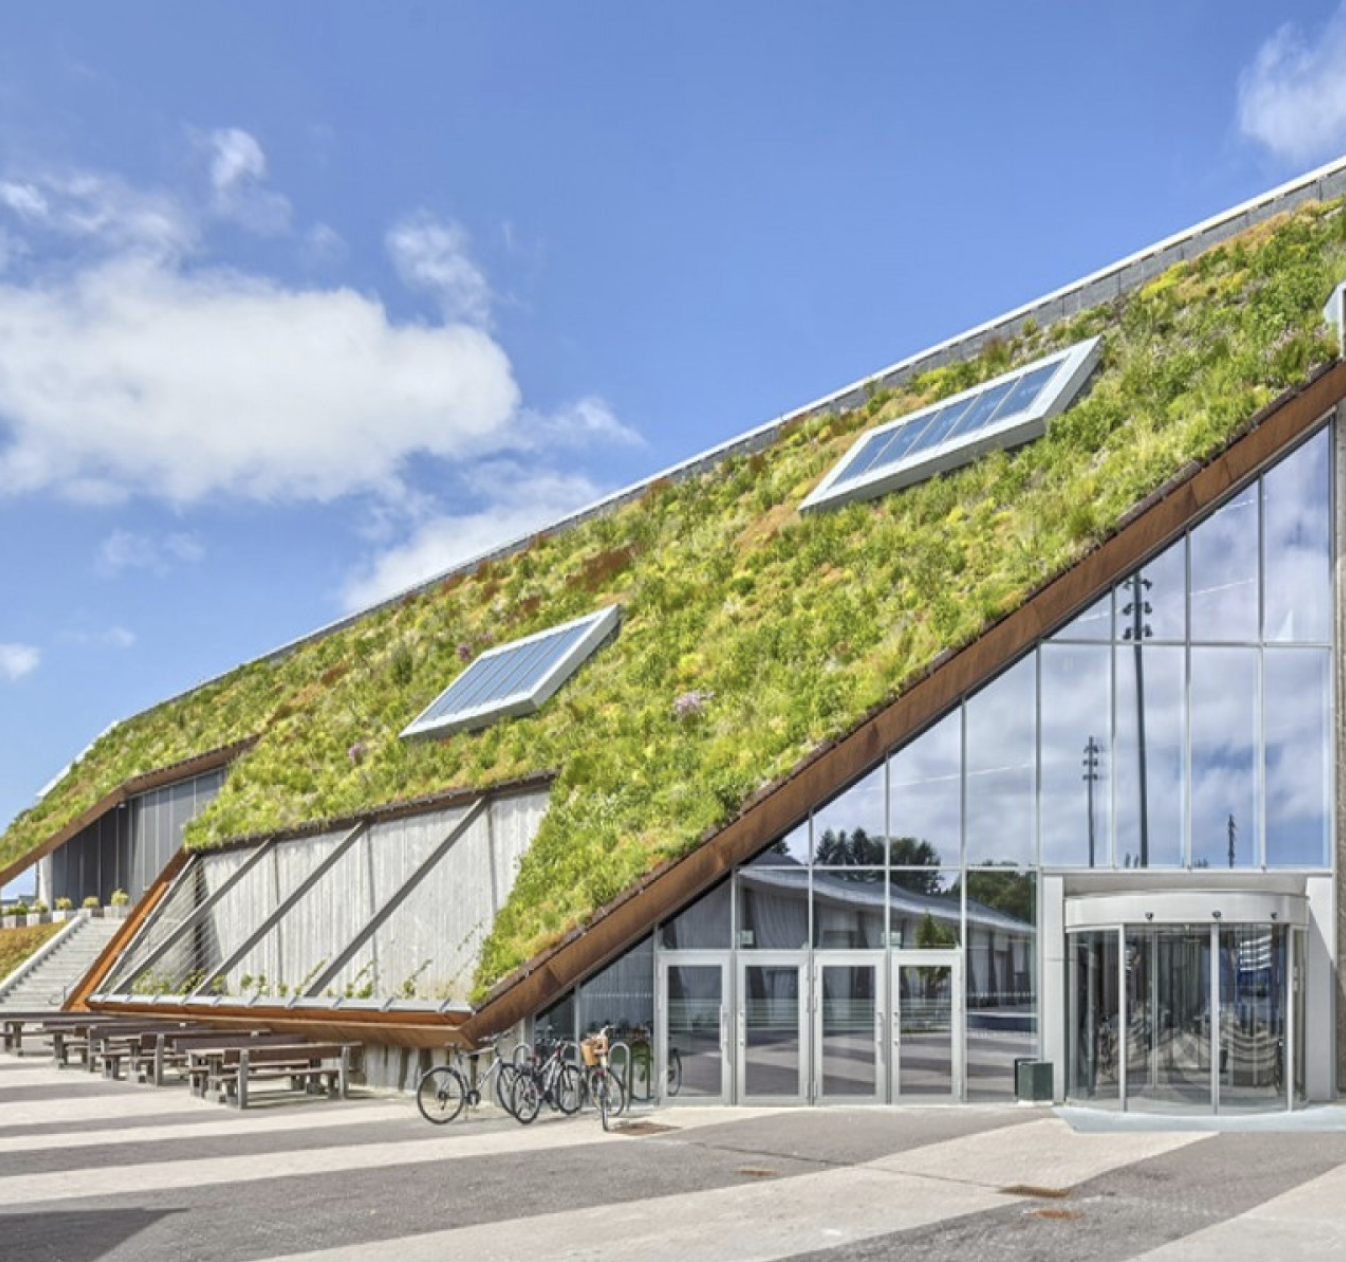 Slopped green roof